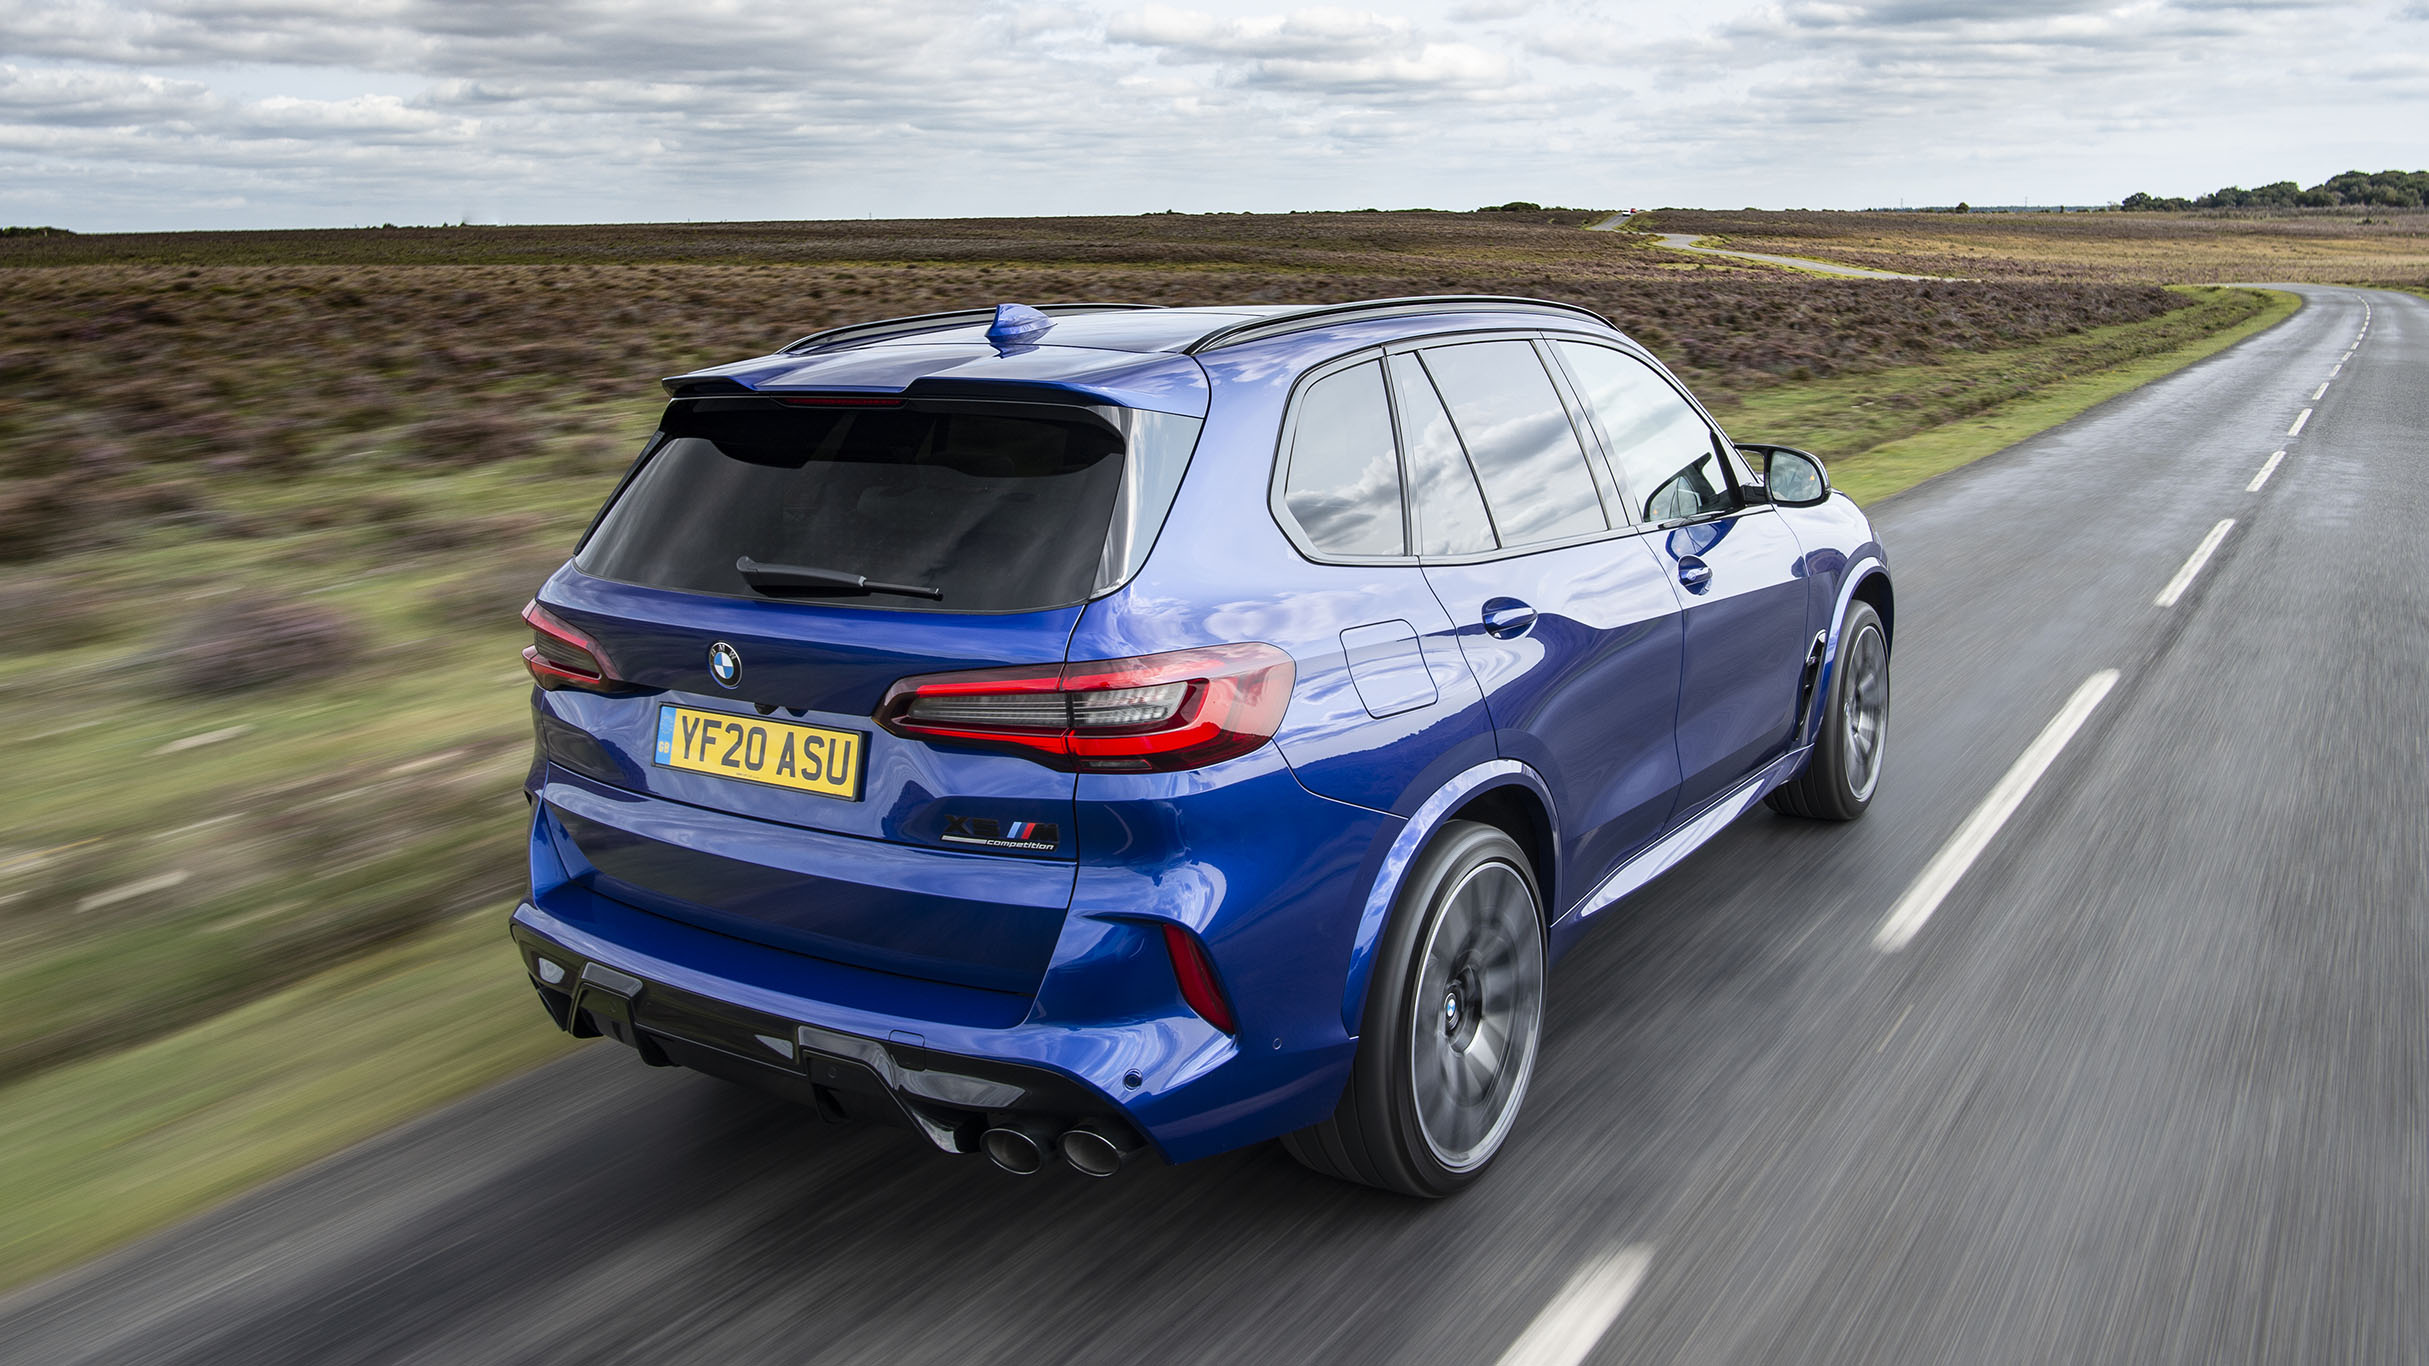 BMW X5 M Competition Review 2023 | Top Gear